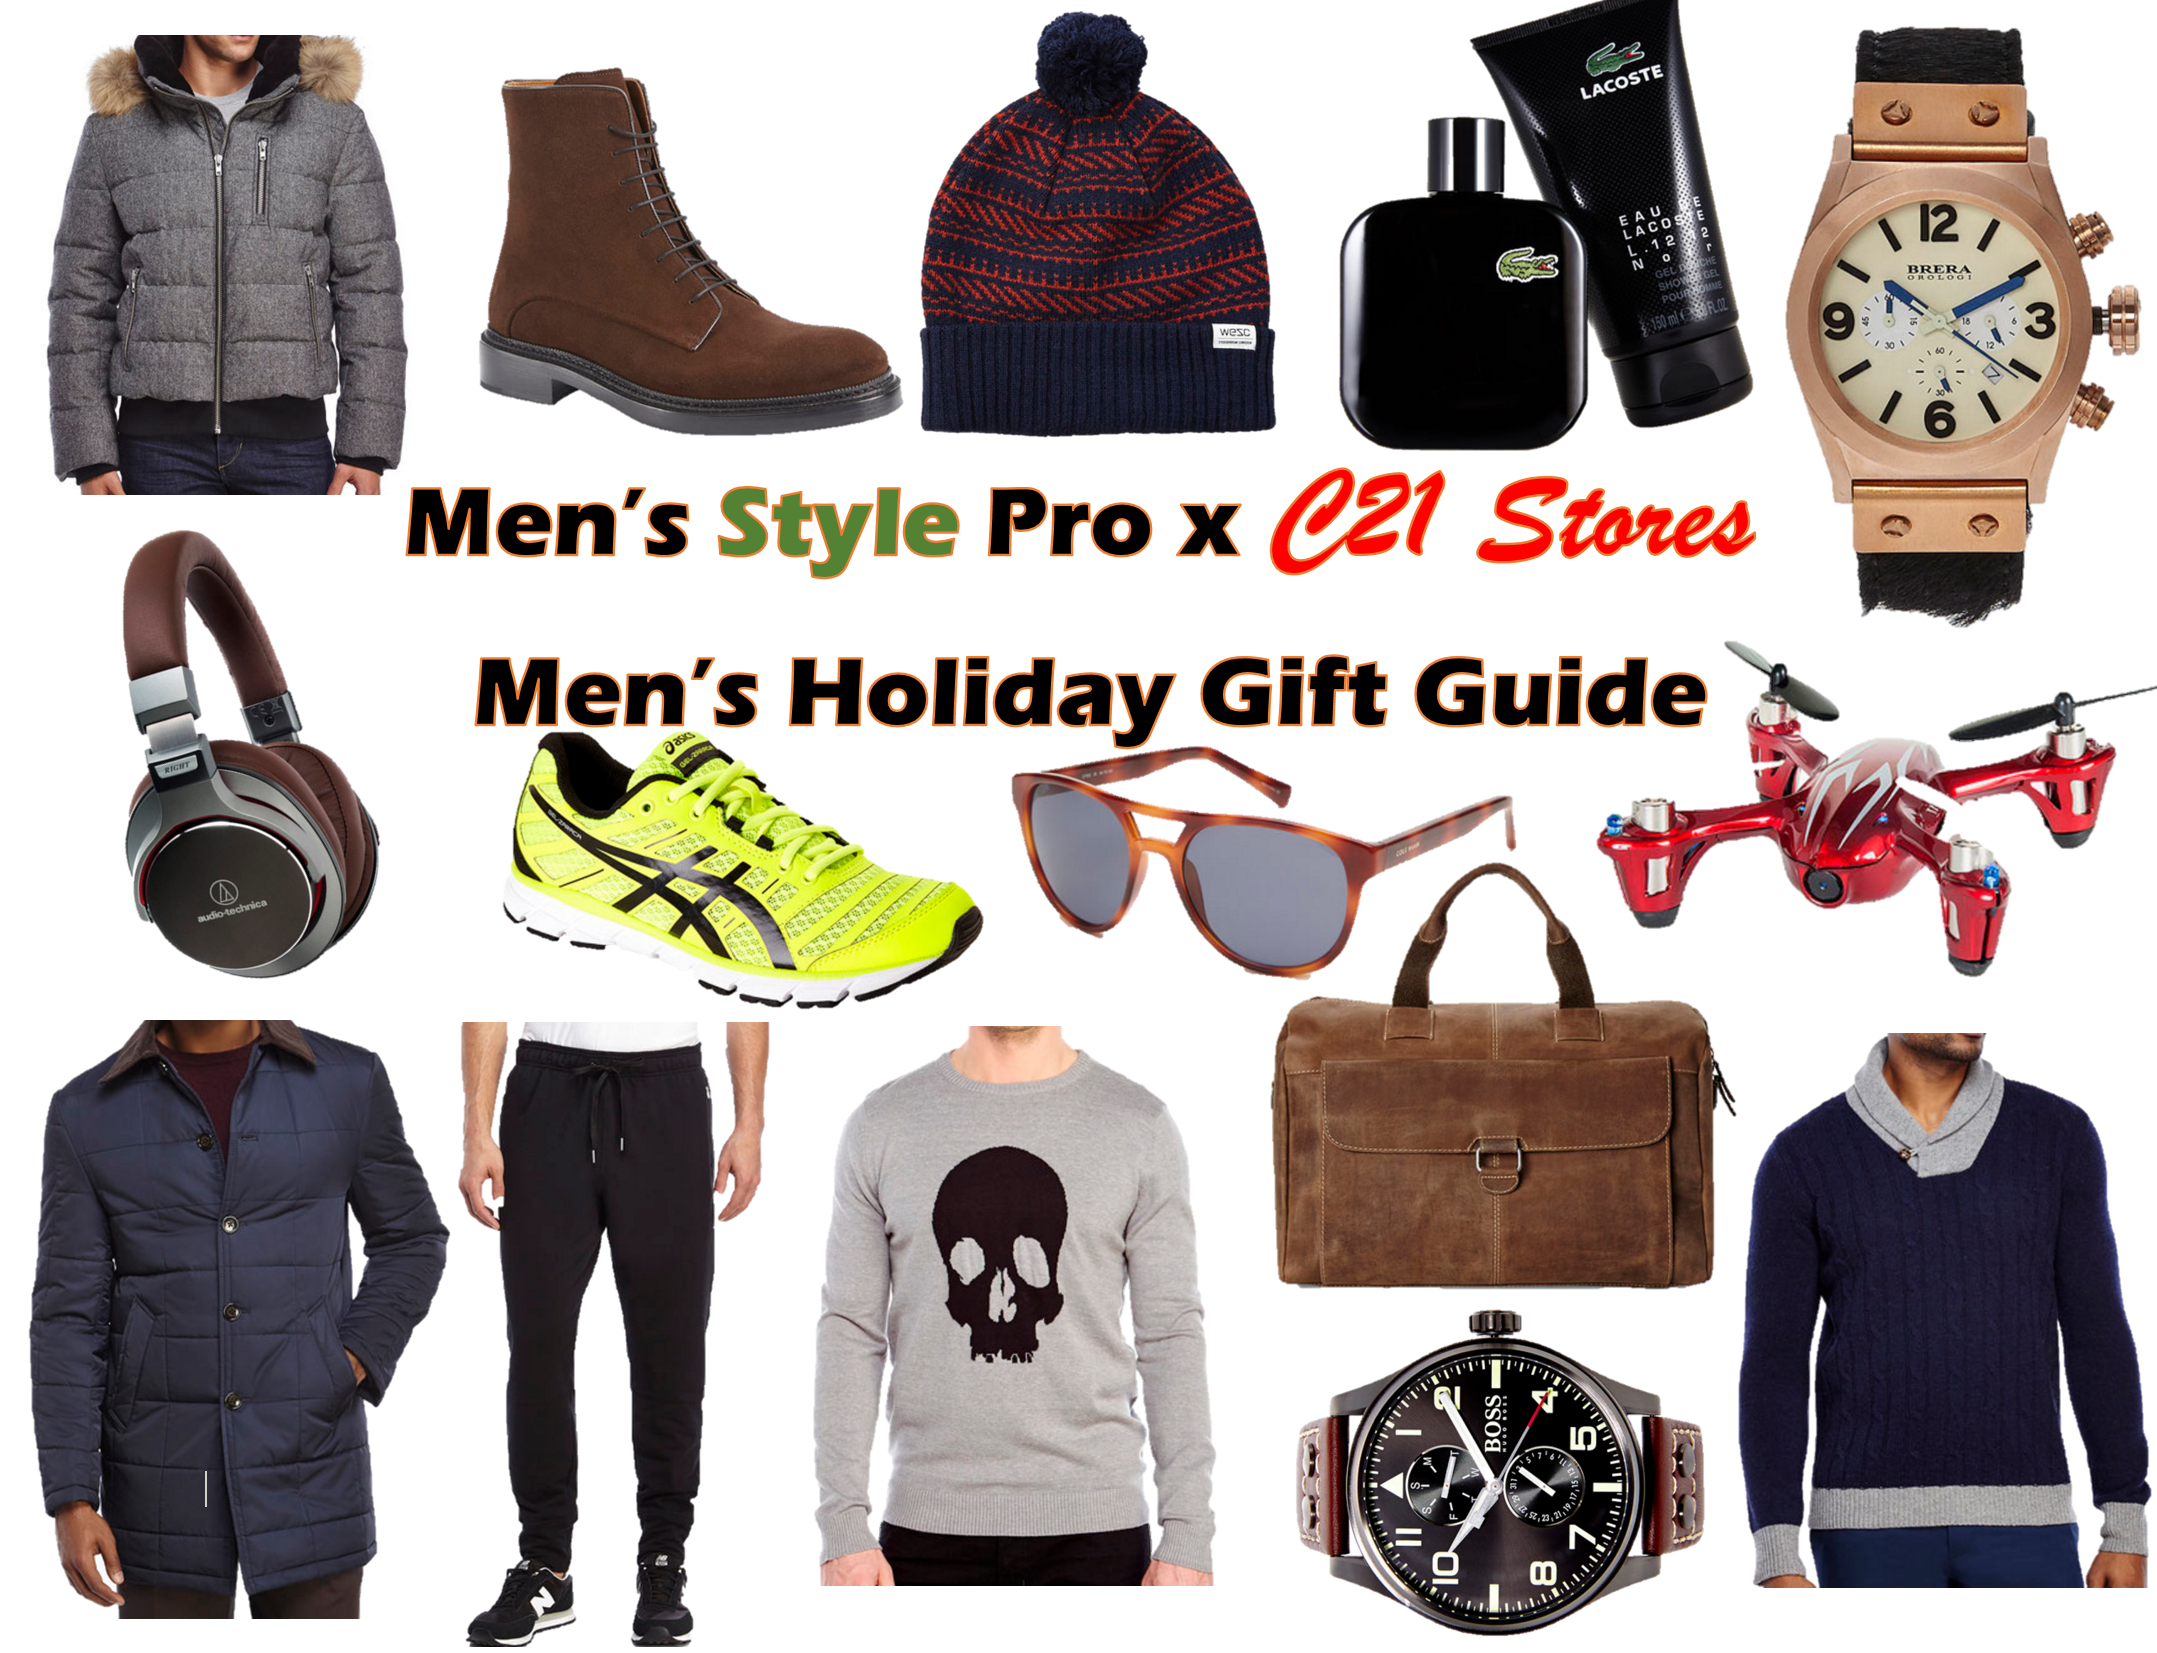 MSP x C21 Stores Men's Holiday Gift Guide